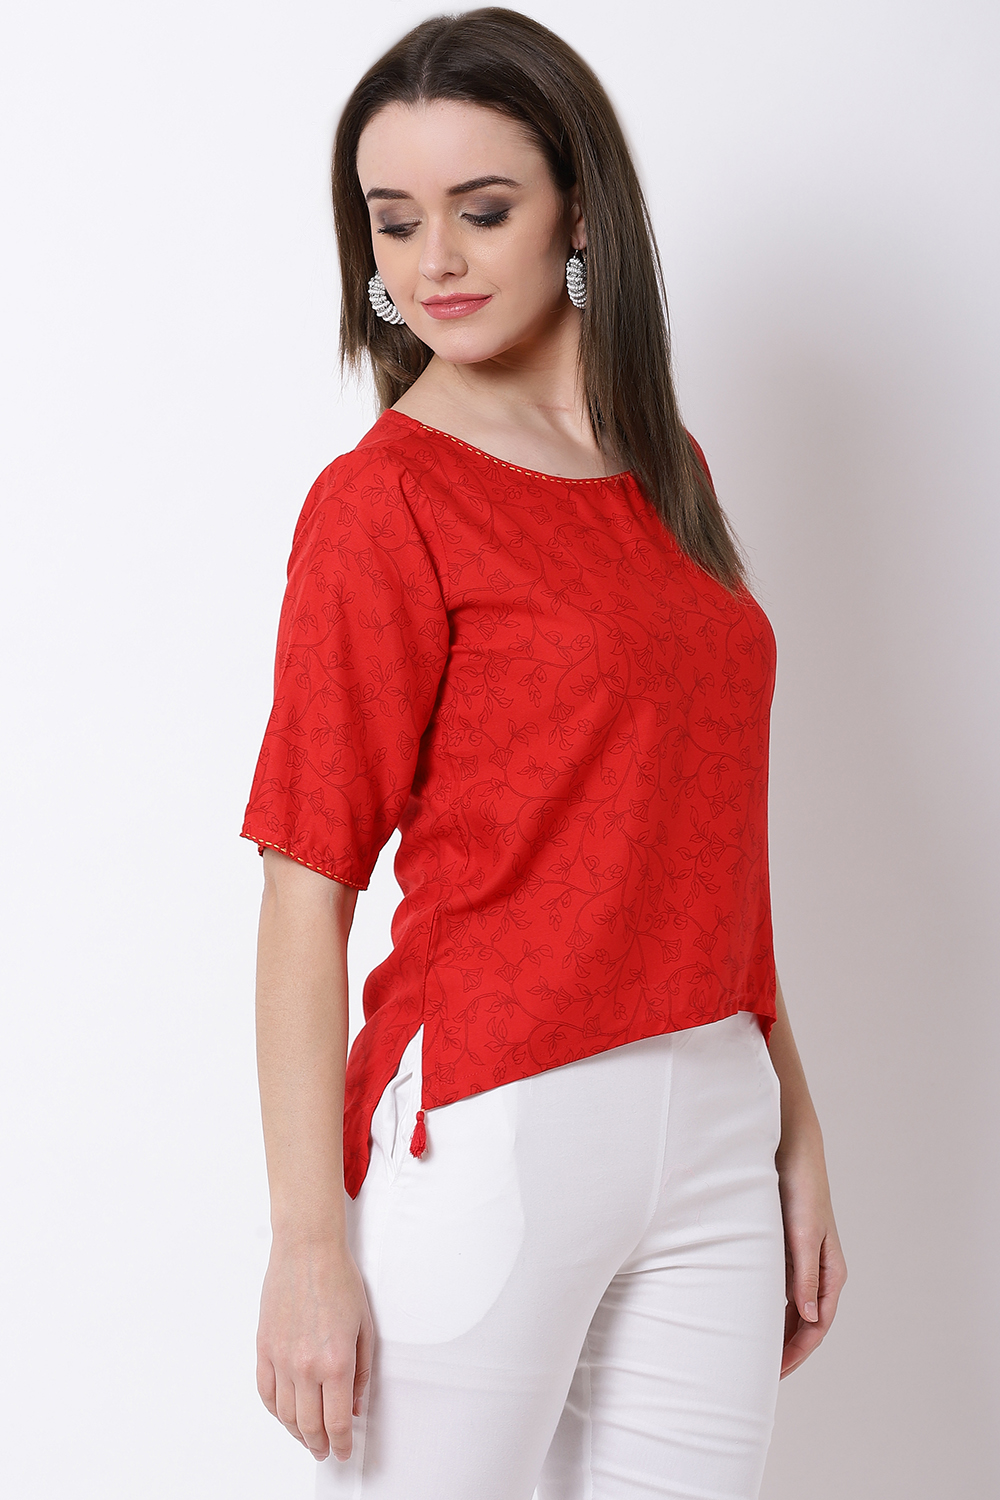 Red Viscose Rayon Top image number 4